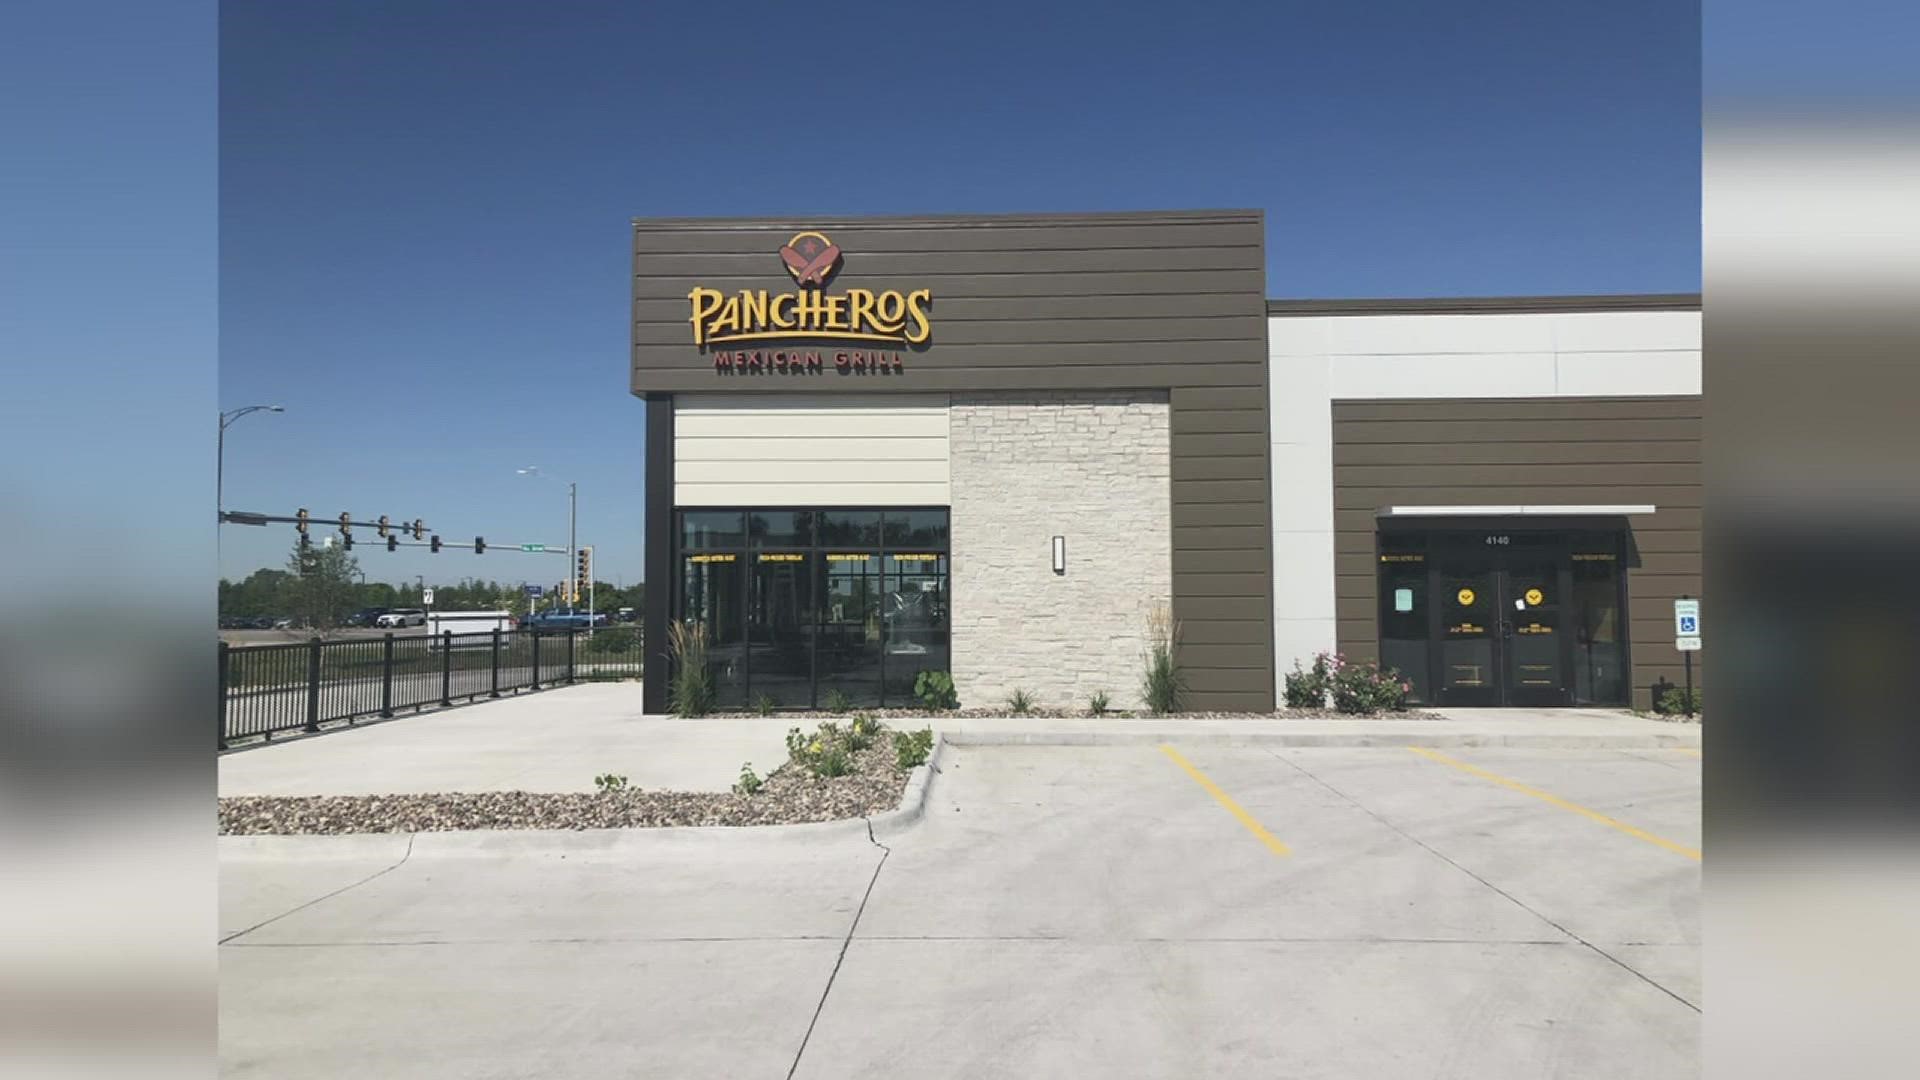 Pancheros is expected to open in Fall 2021 at the corner of John Deere Road and 41st Street in Moline